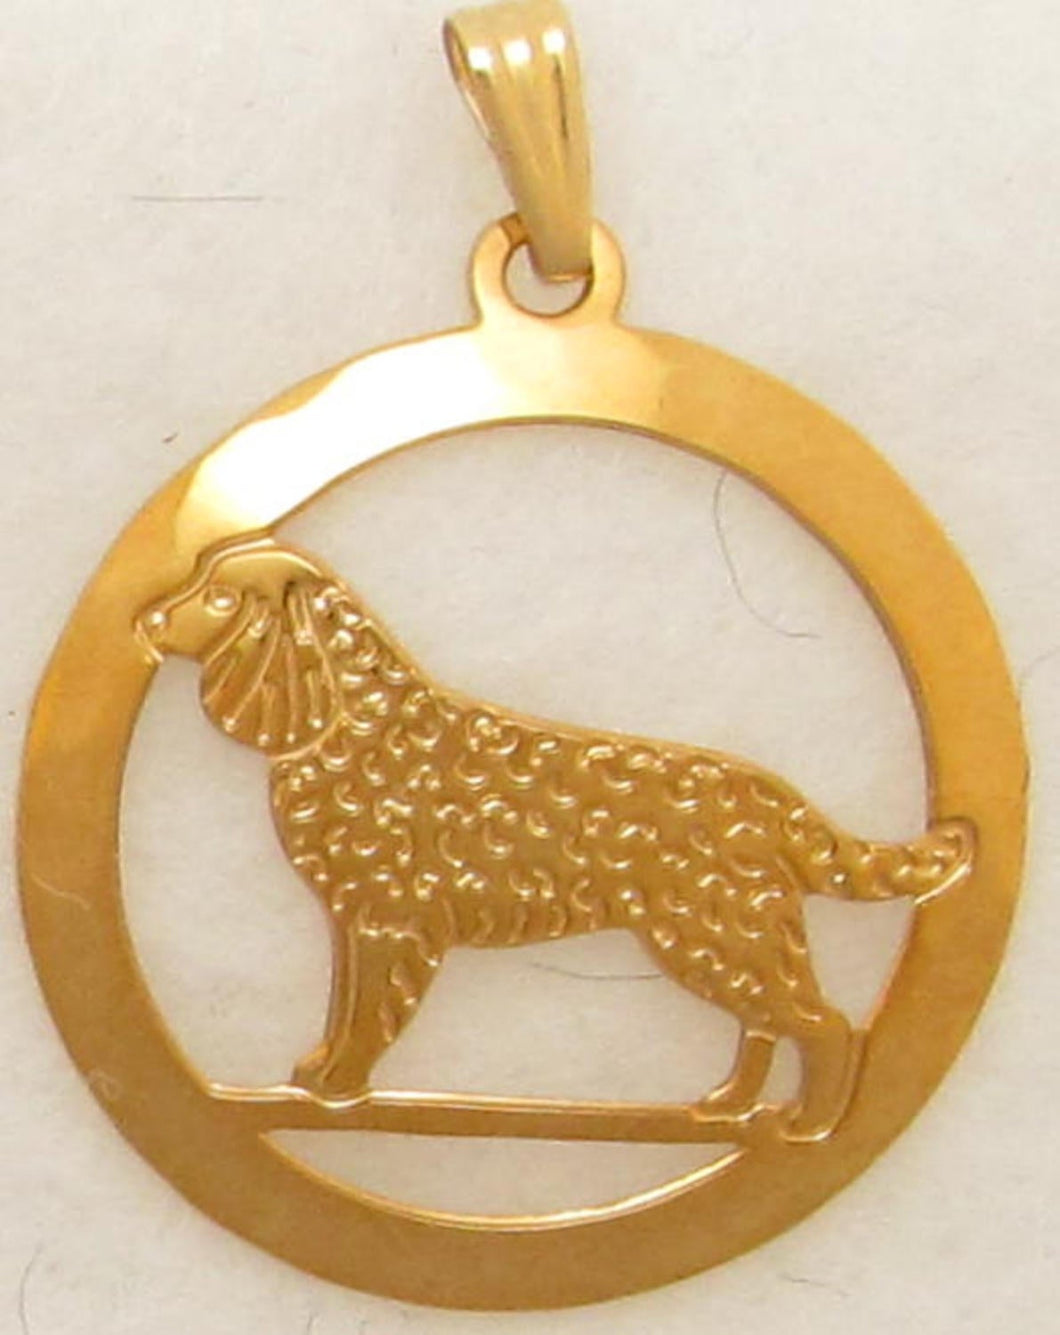 American Water Spaniel Pendant by Touchstone Dog Designs // American Water Spaniel Jewelry // Dog Breed Jewelry